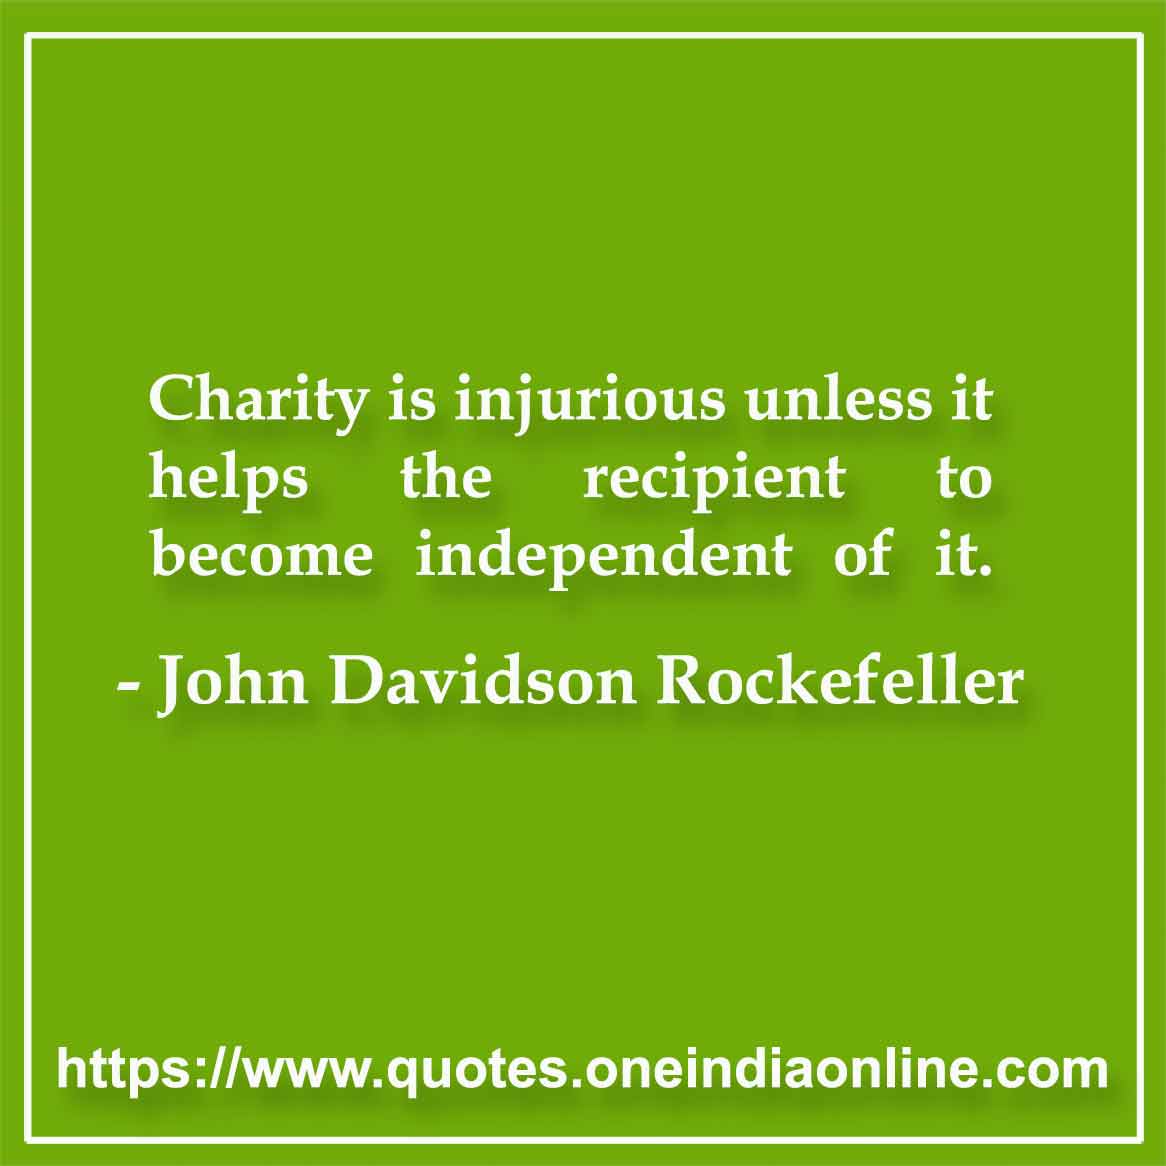 Charity is injurious unless it helps the recipient to become independent of it. 

-  John Davidson Rockefeller, Sr. 